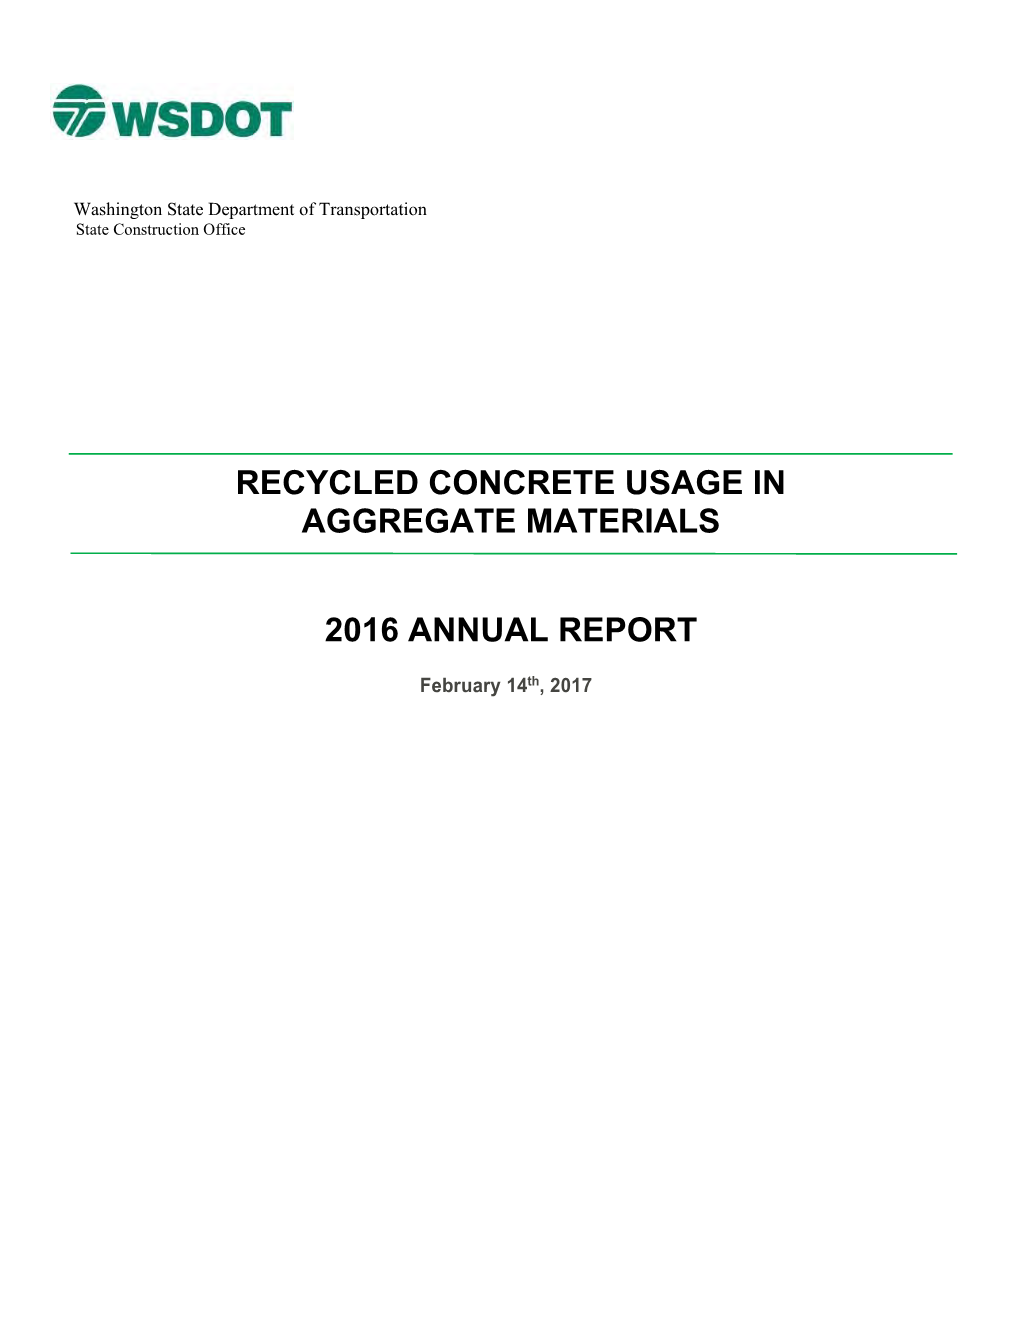 Recycled Concrete Usage in Aggregrate Materials